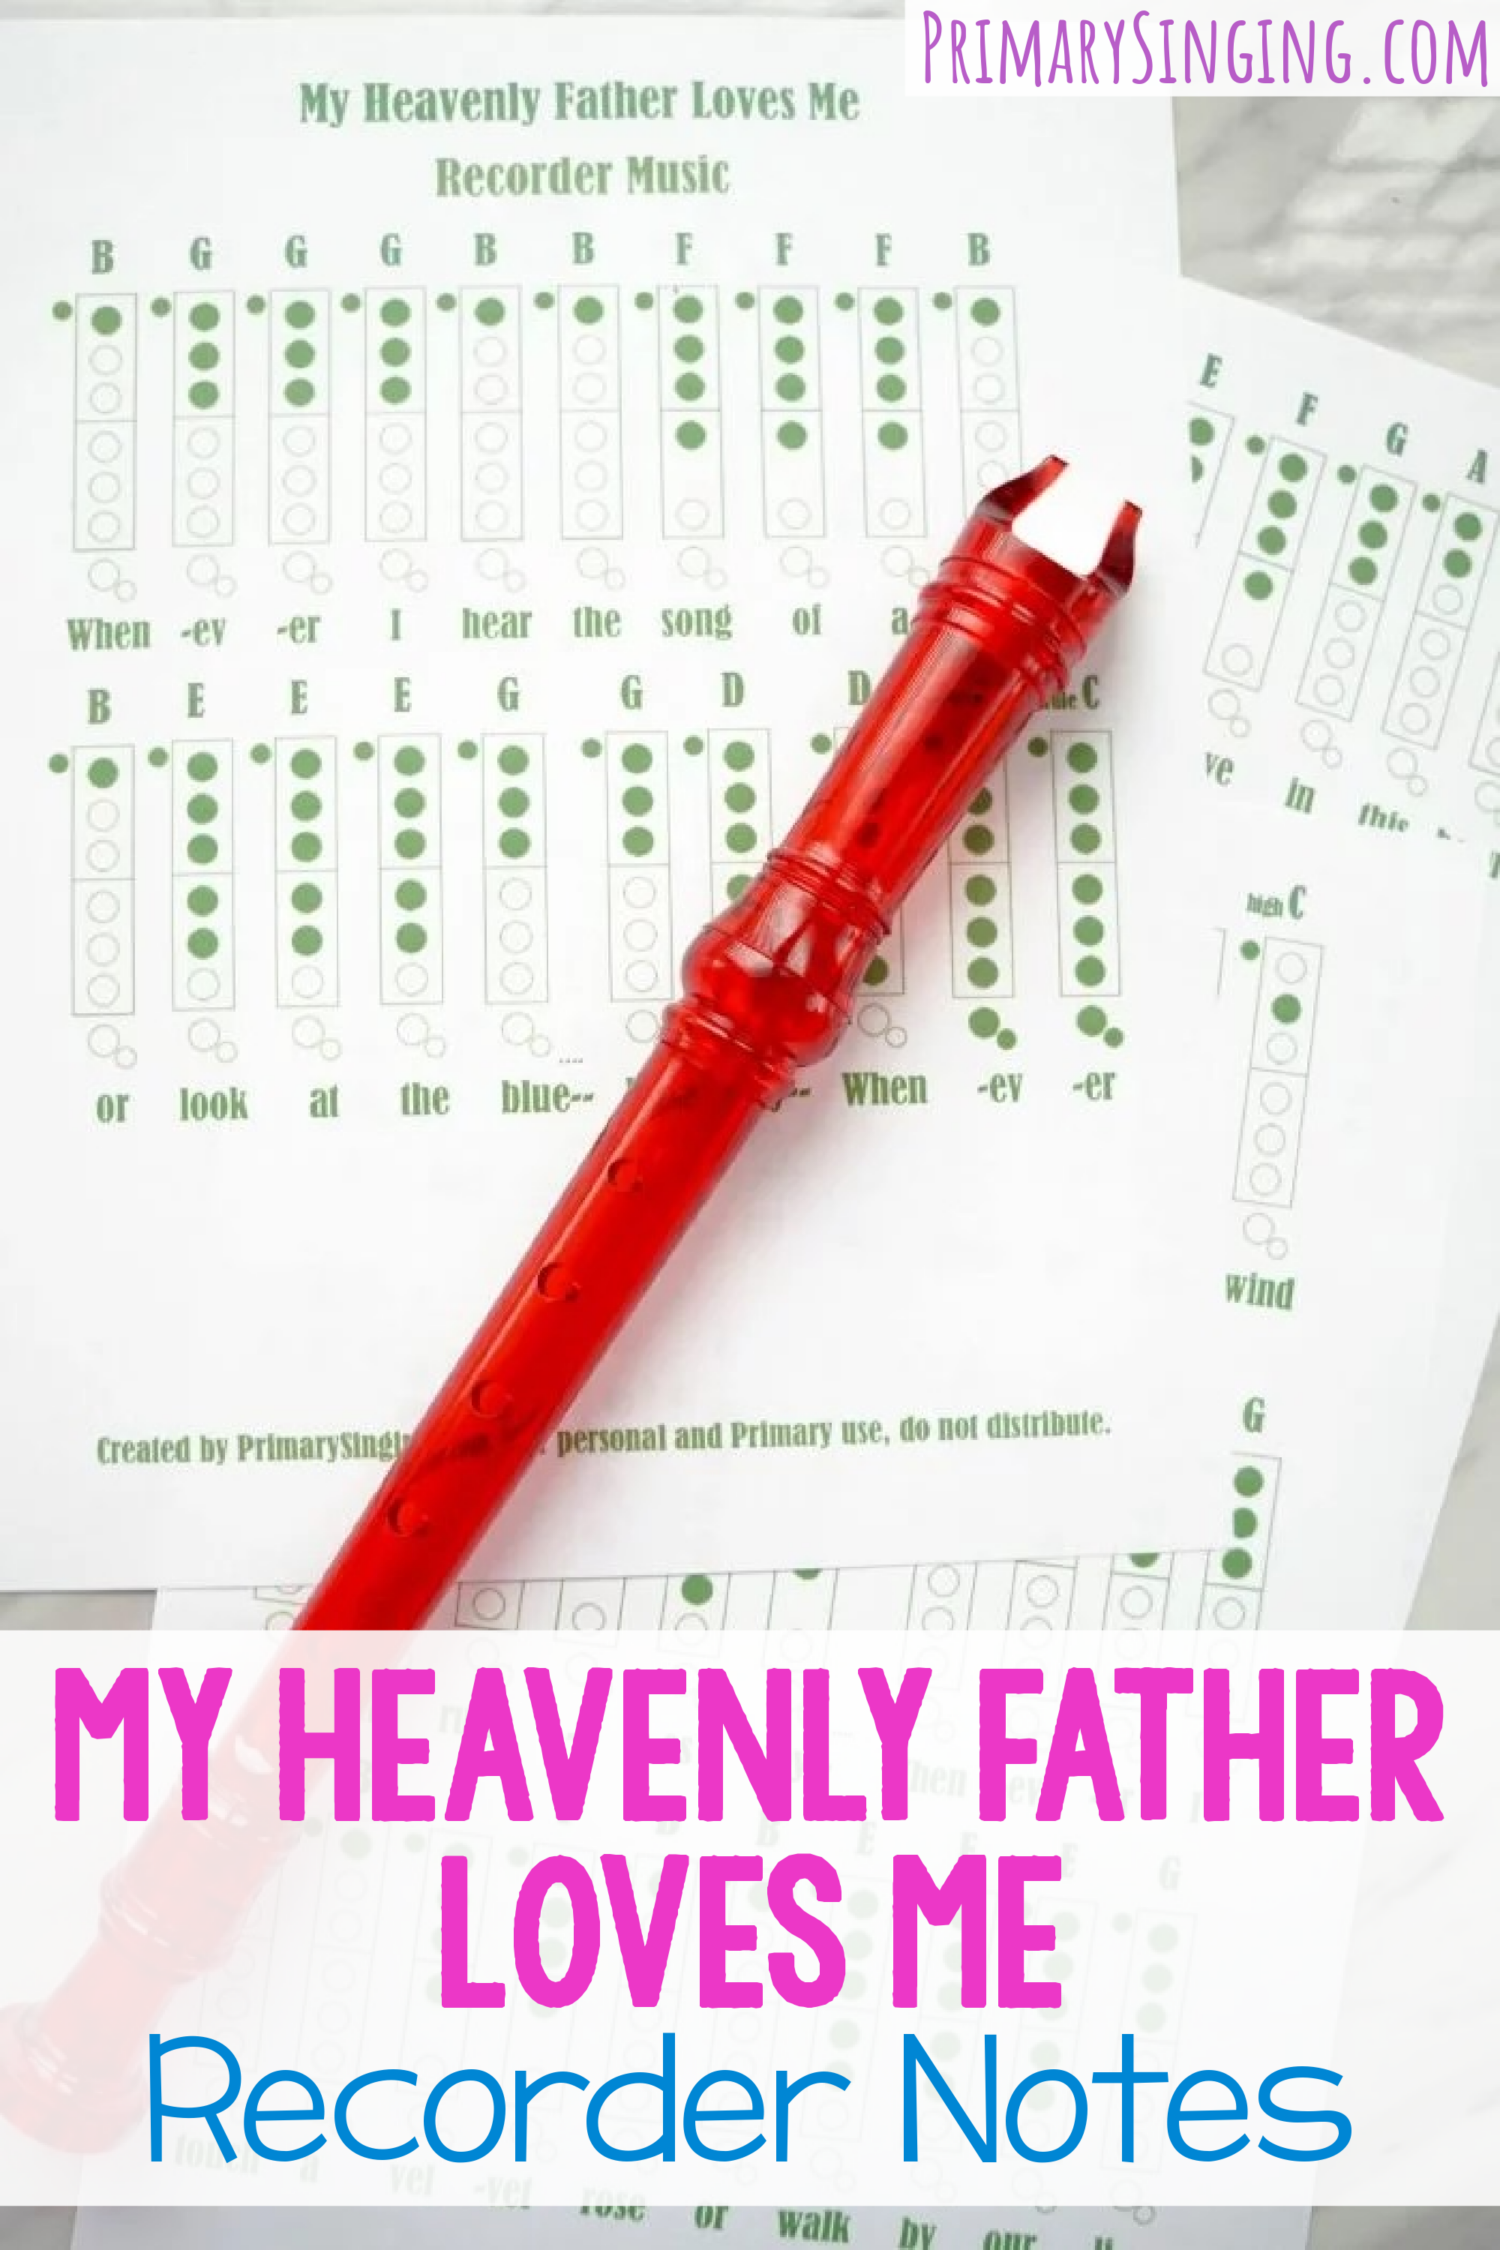 My Heavenly Father Loves Me recorder sheet music singing time idea with printable song helps for LDS Primary music leaders teaching this song. Interactive way to include the oldest Senior Primary class of kiddos (especially those boys!) engaged with learning this song!